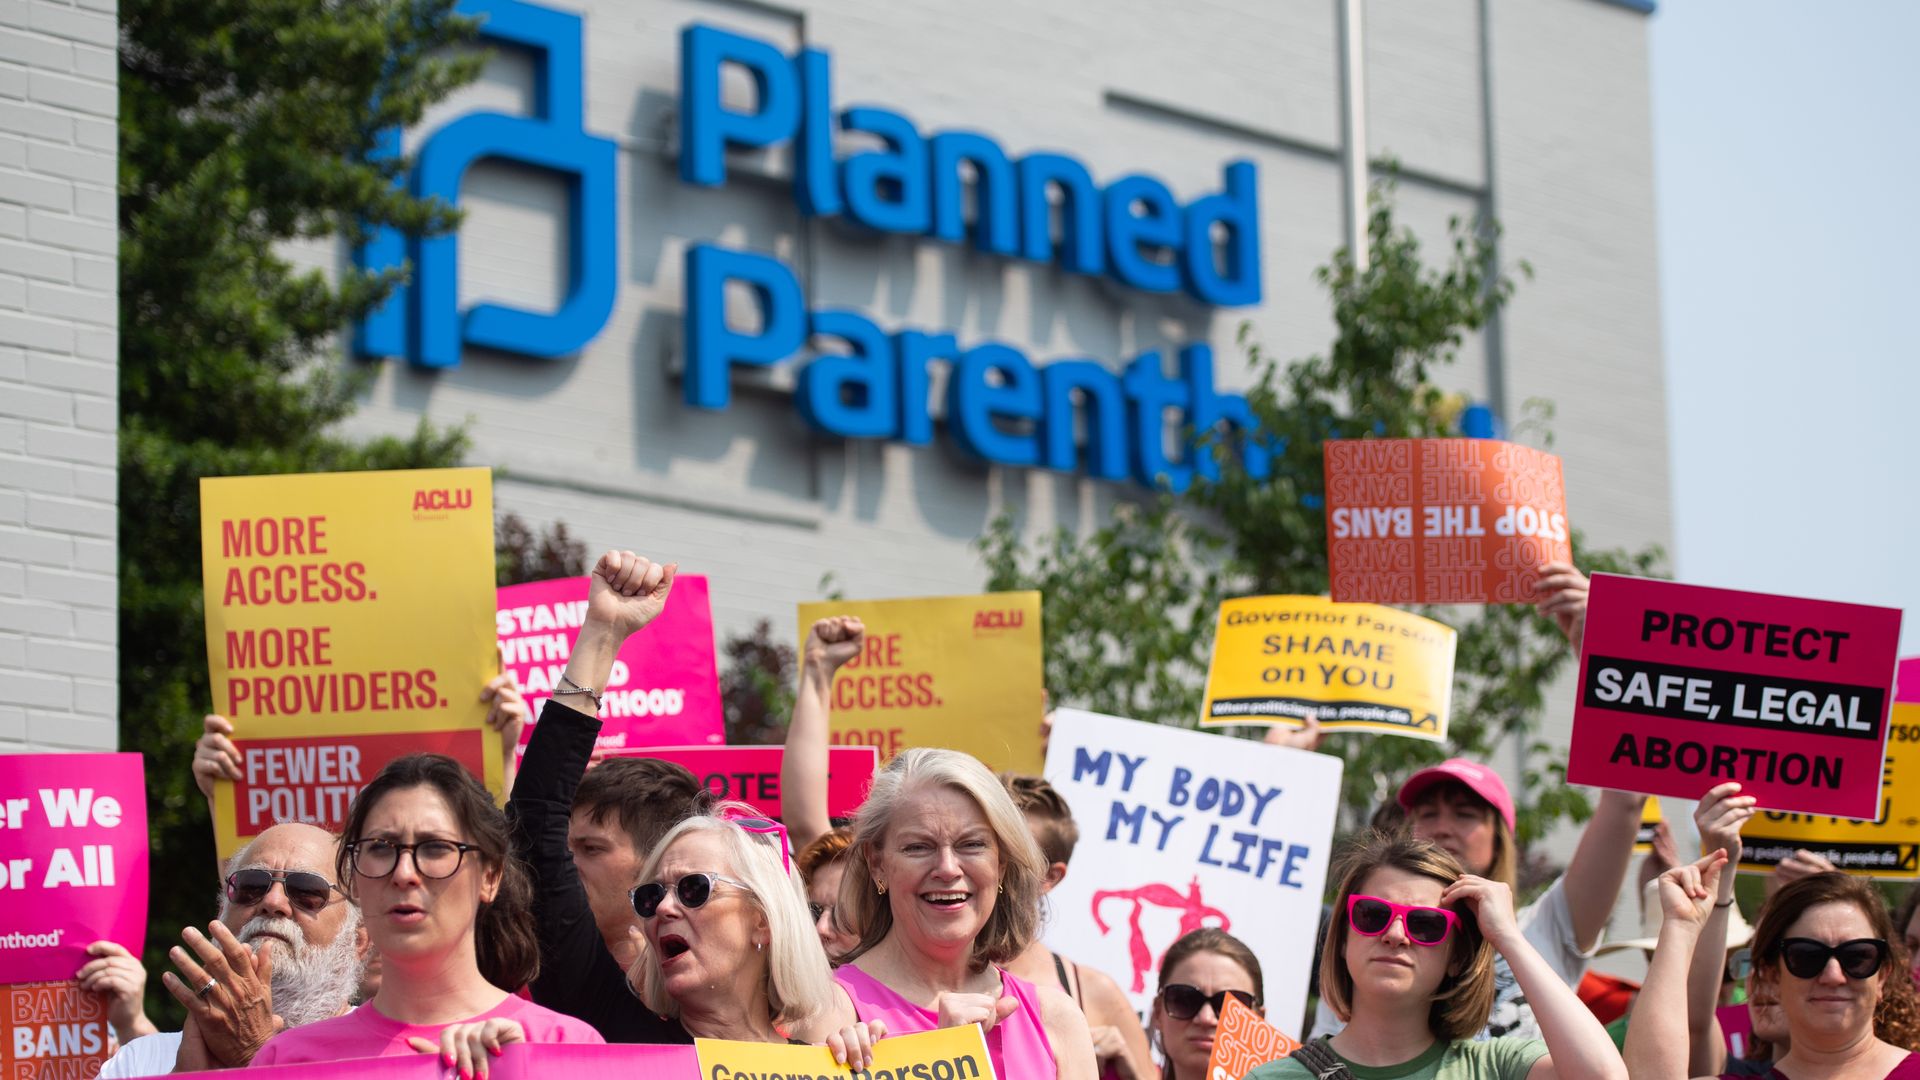  Pro-choice supporters and staff of Planned Parenthood hold a rally outside the Planned Parenthood Reproductive Health Services Center in St. Louis, Missouri, May 31.